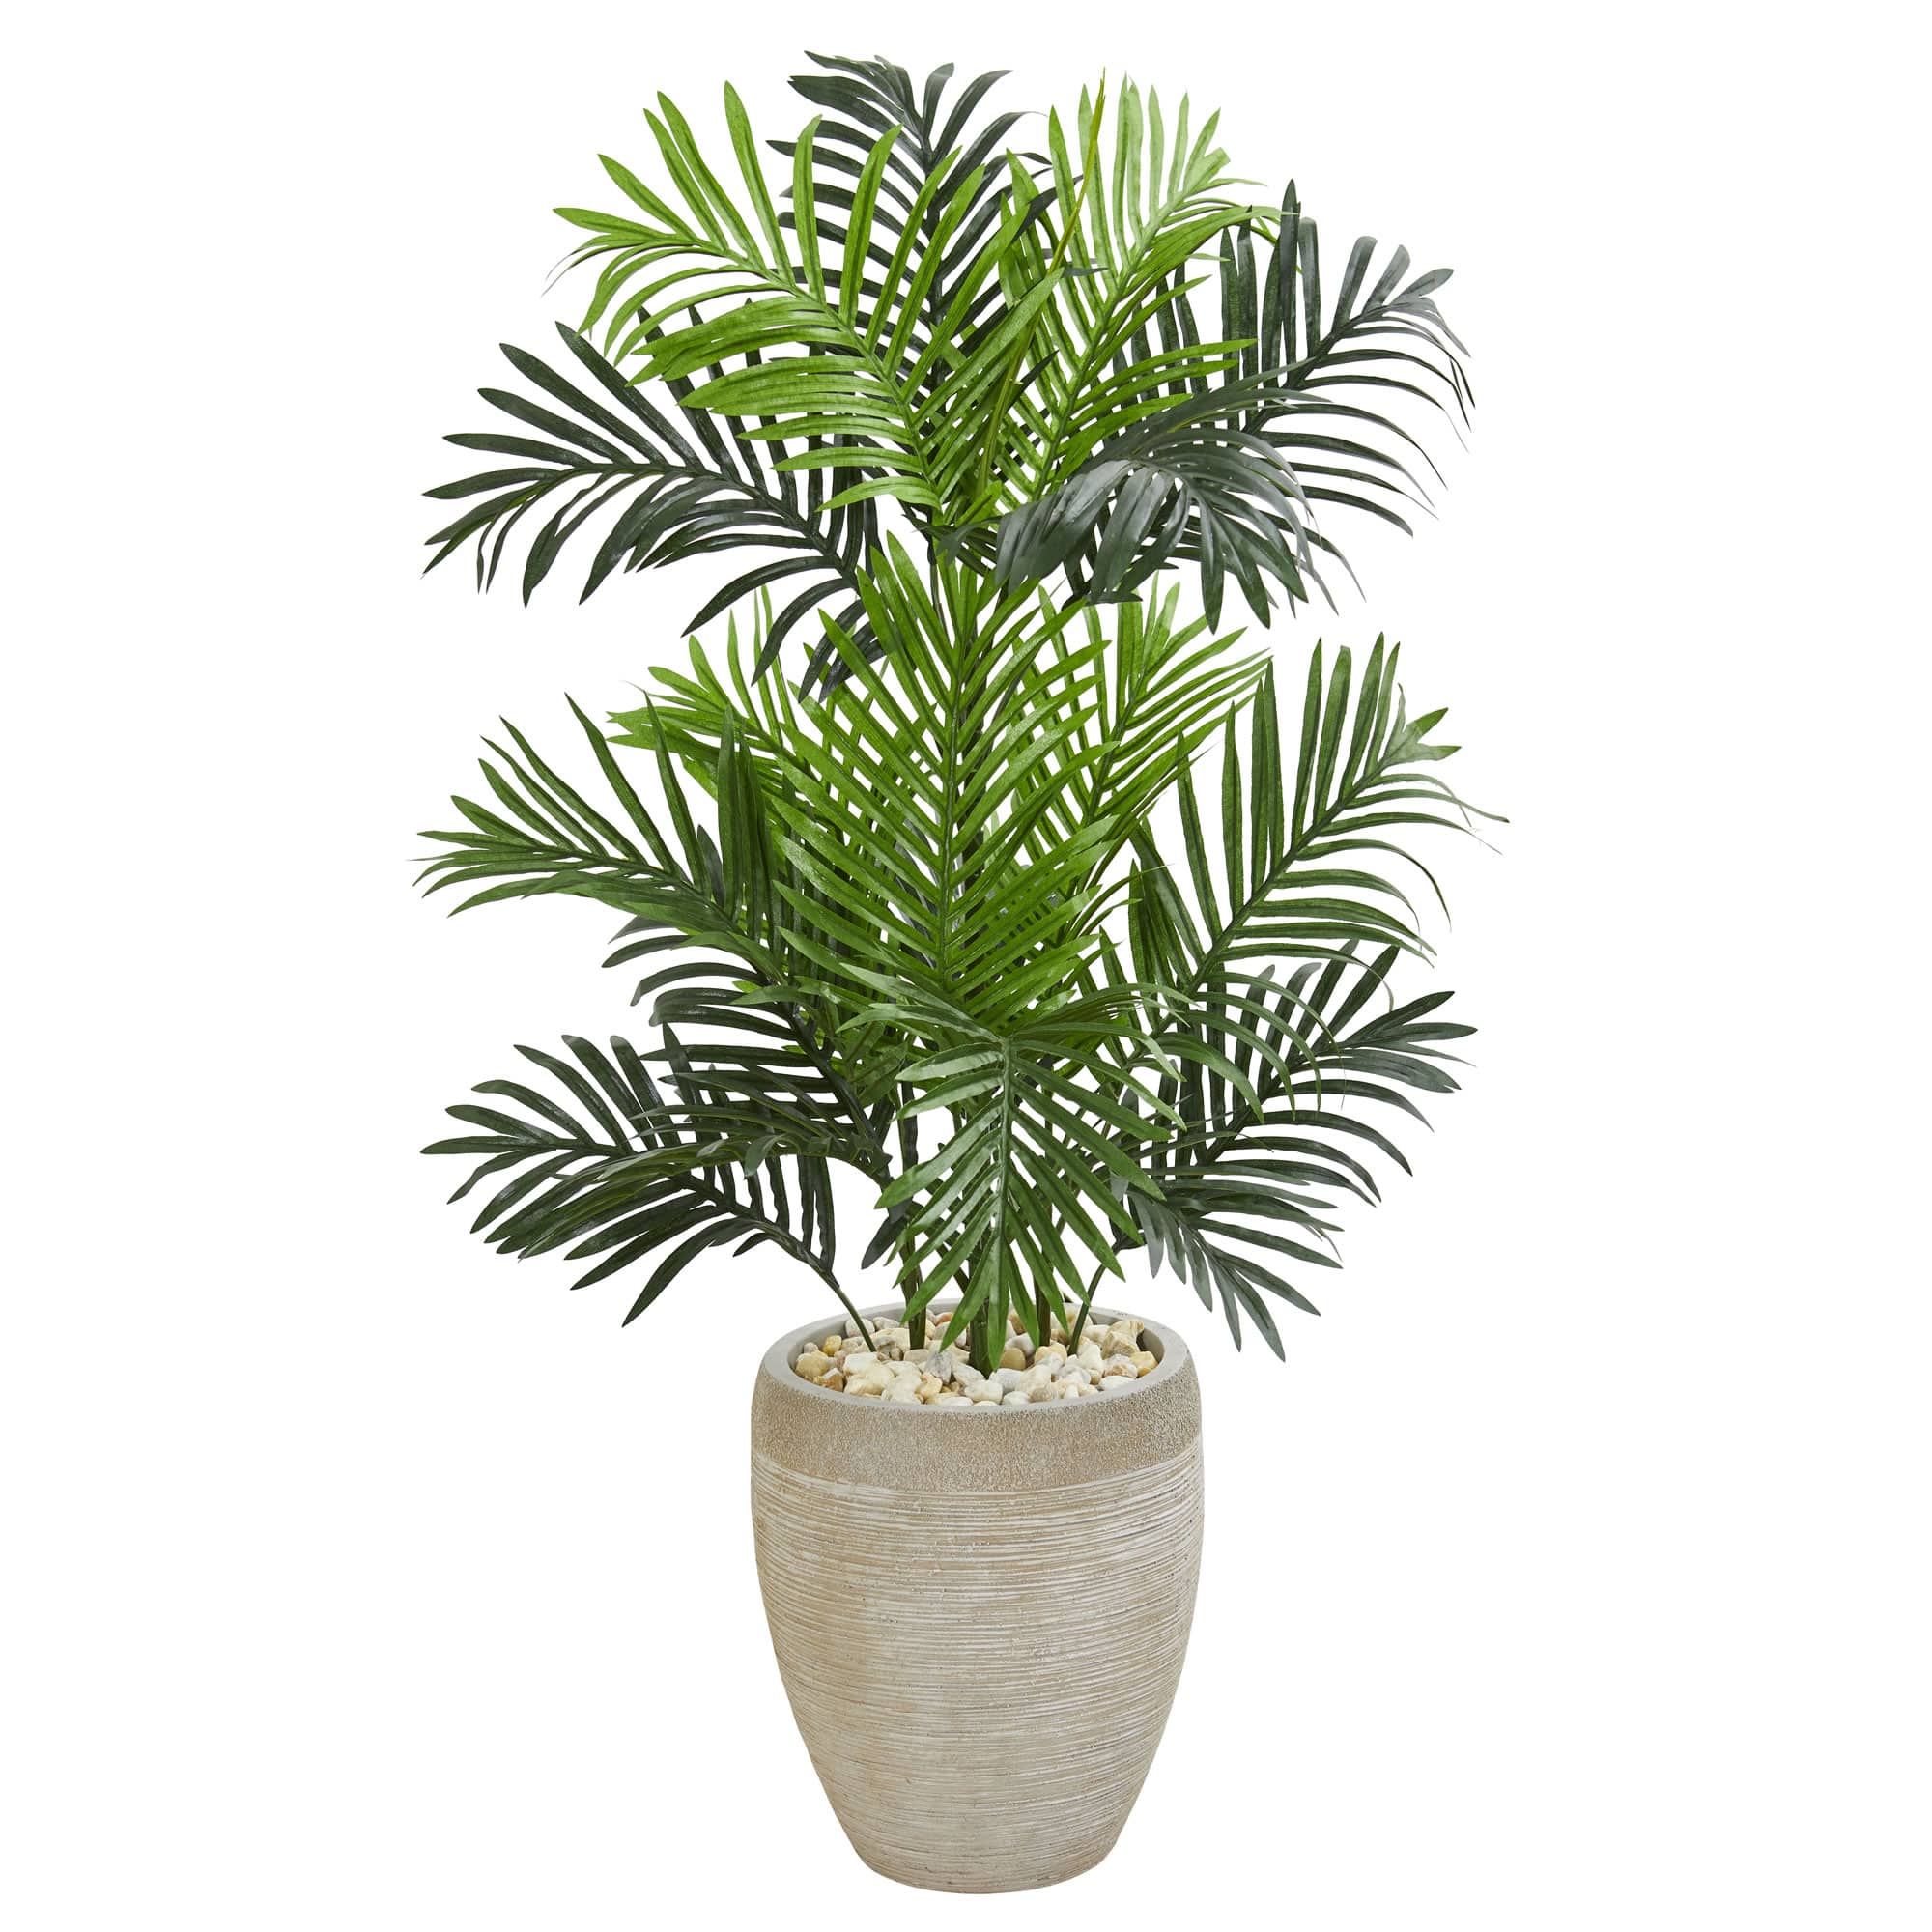 3.5ft. Artificial Paradise Palm Tree in Sand Colored Planter